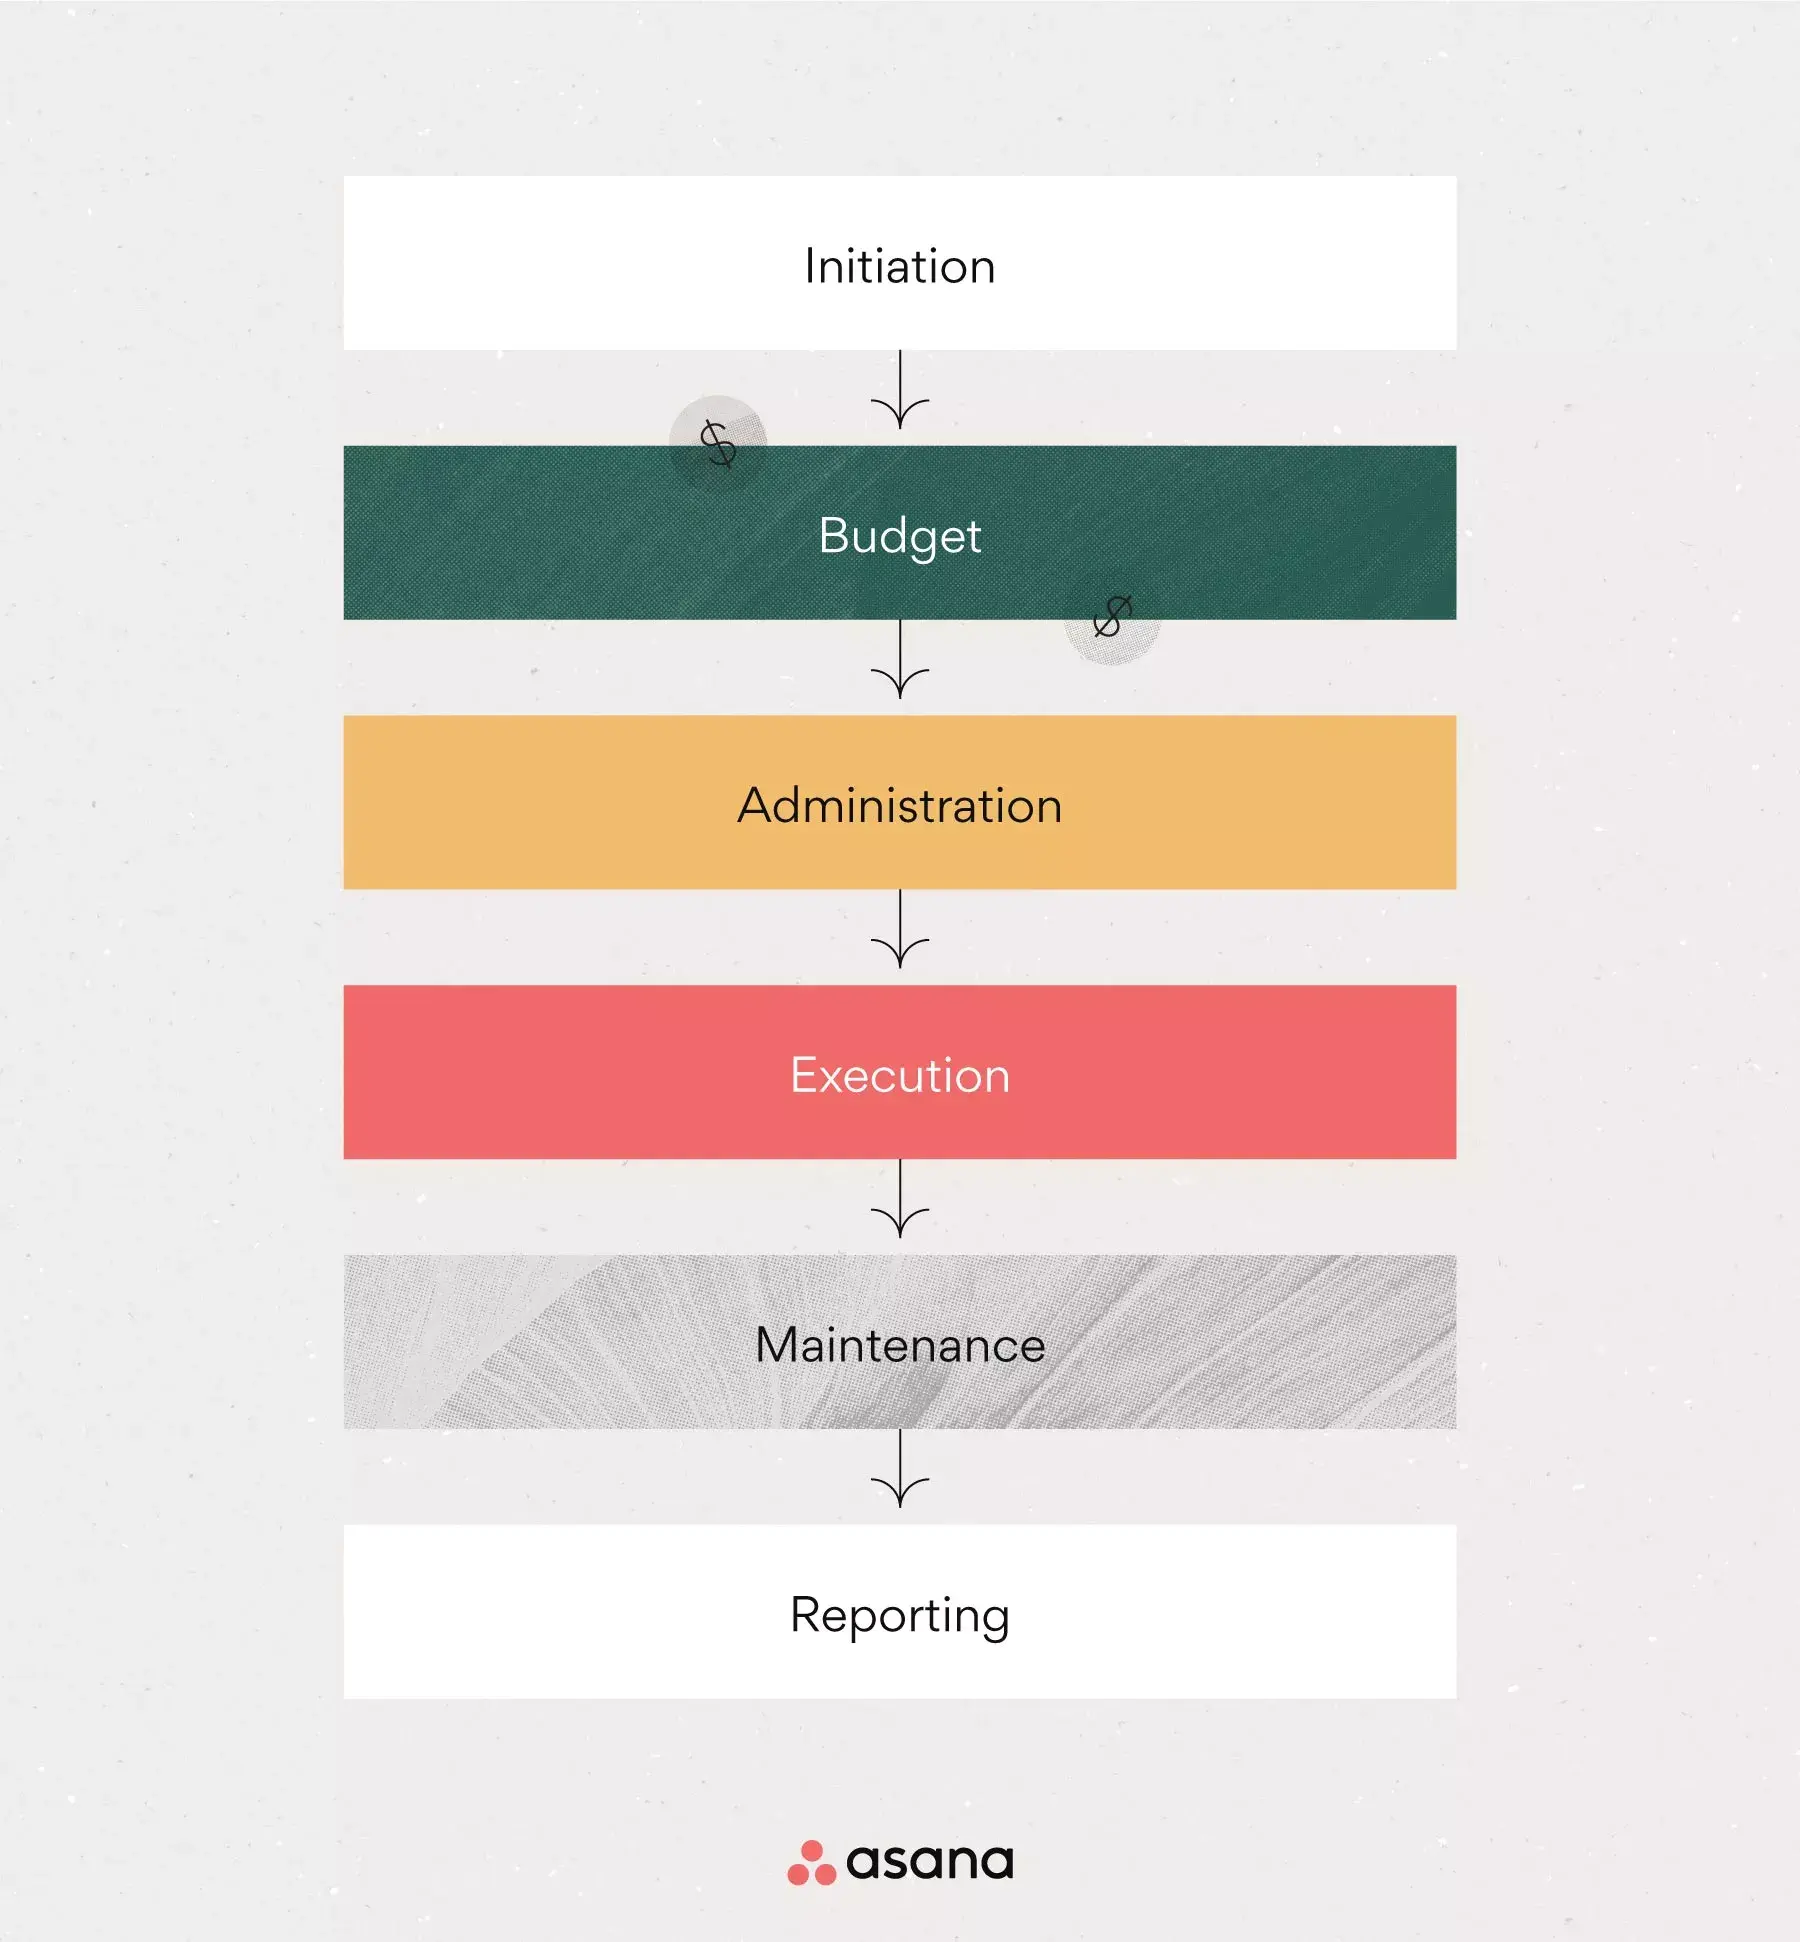 [inline illustration] The project accounting process flow (infographic)